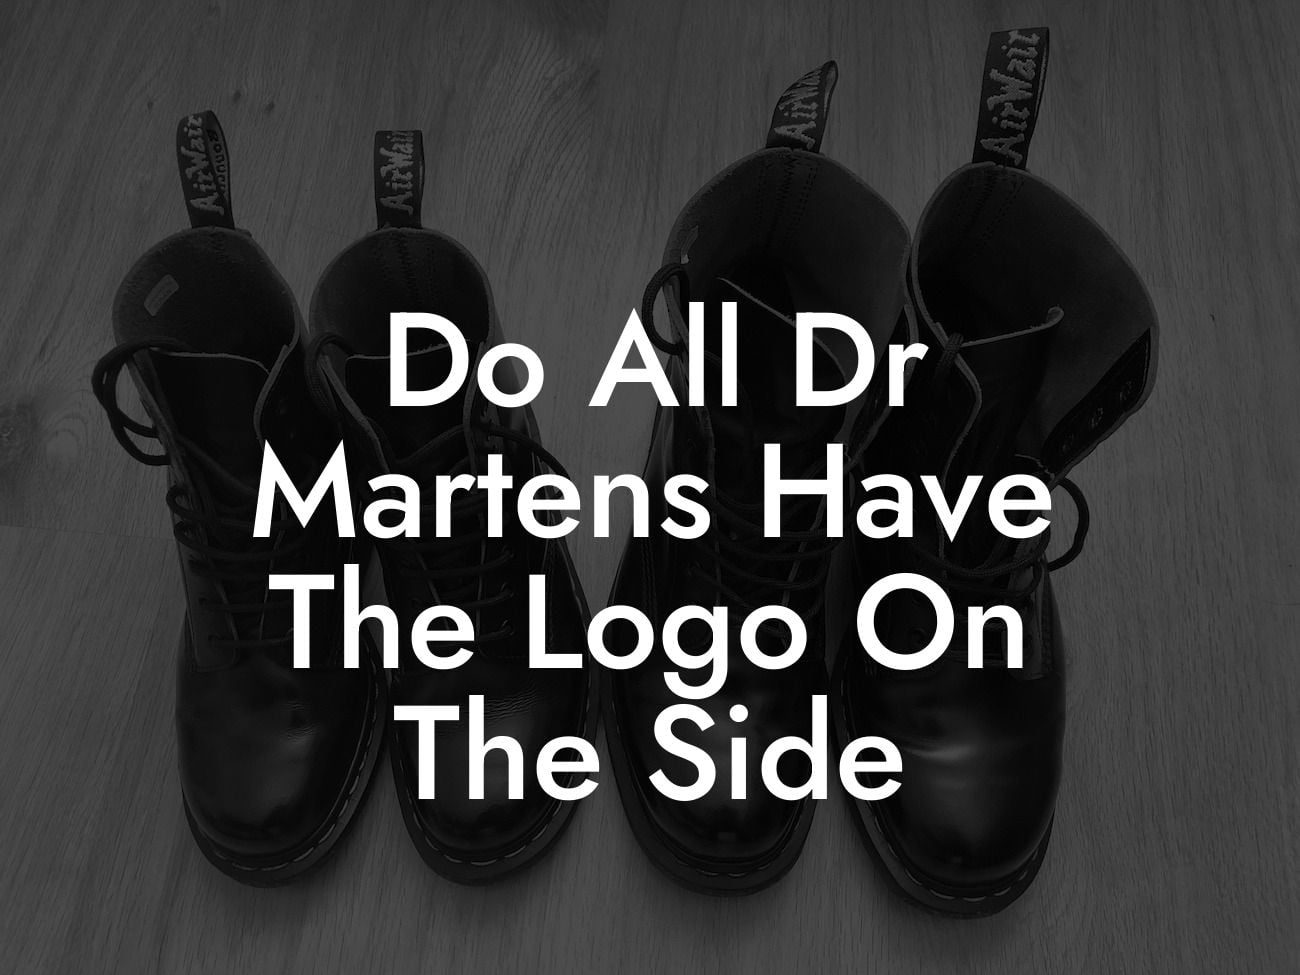 Do All Dr Martens Have The Logo On The Side